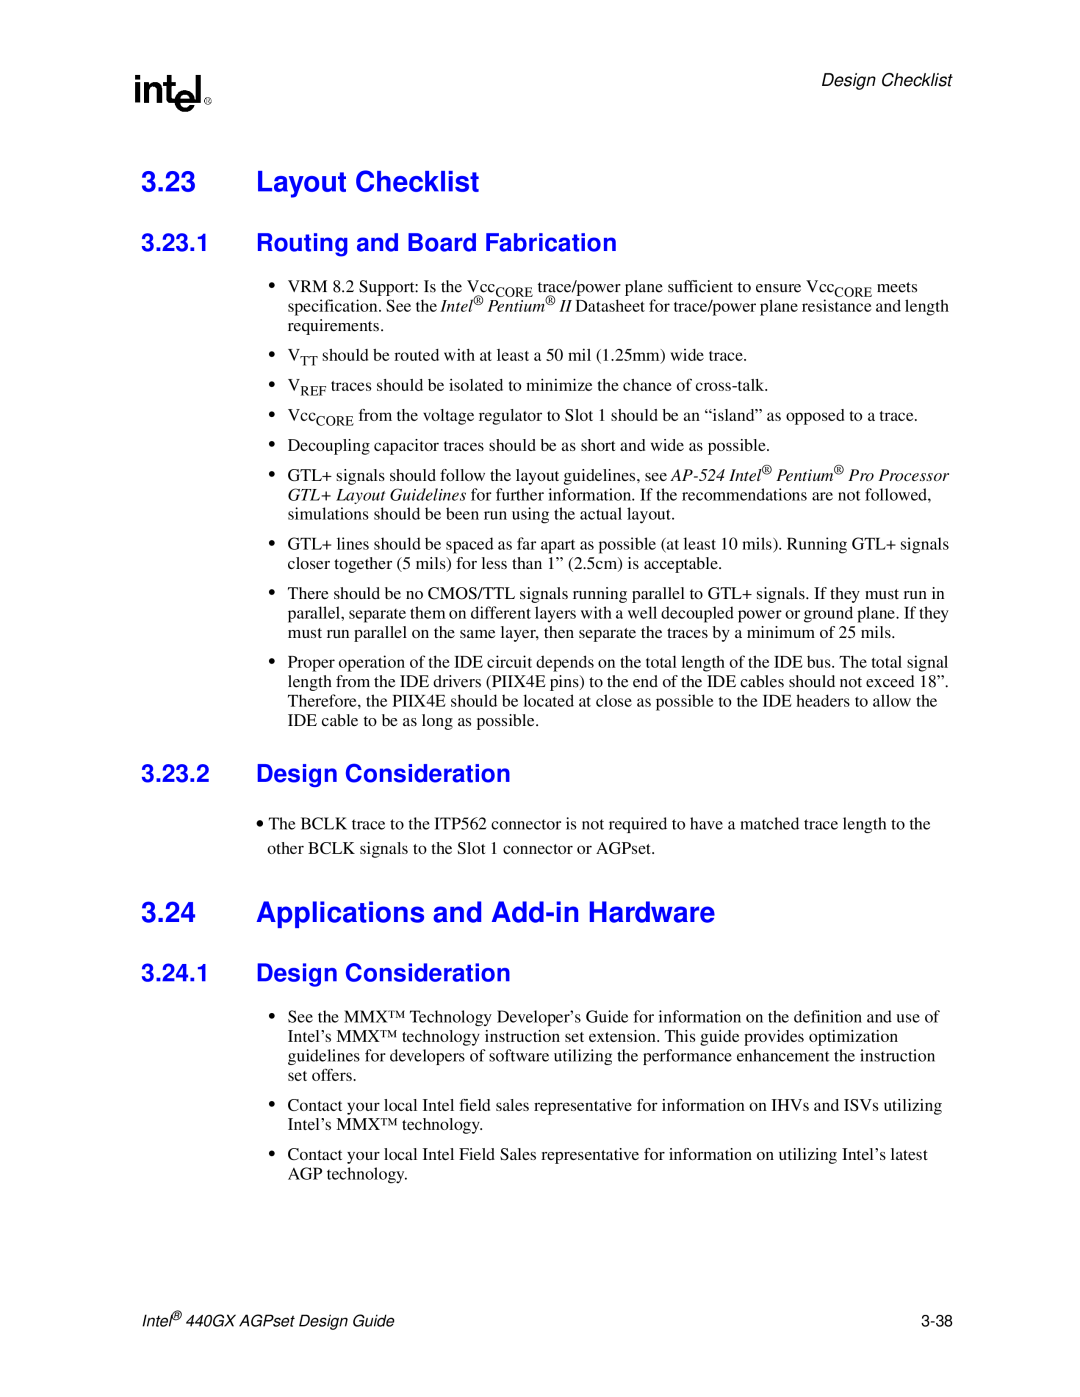 Intel 440GX manual Layout Checklist, Applications and Add-in Hardware, Routing and Board Fabrication, Design Consideration 